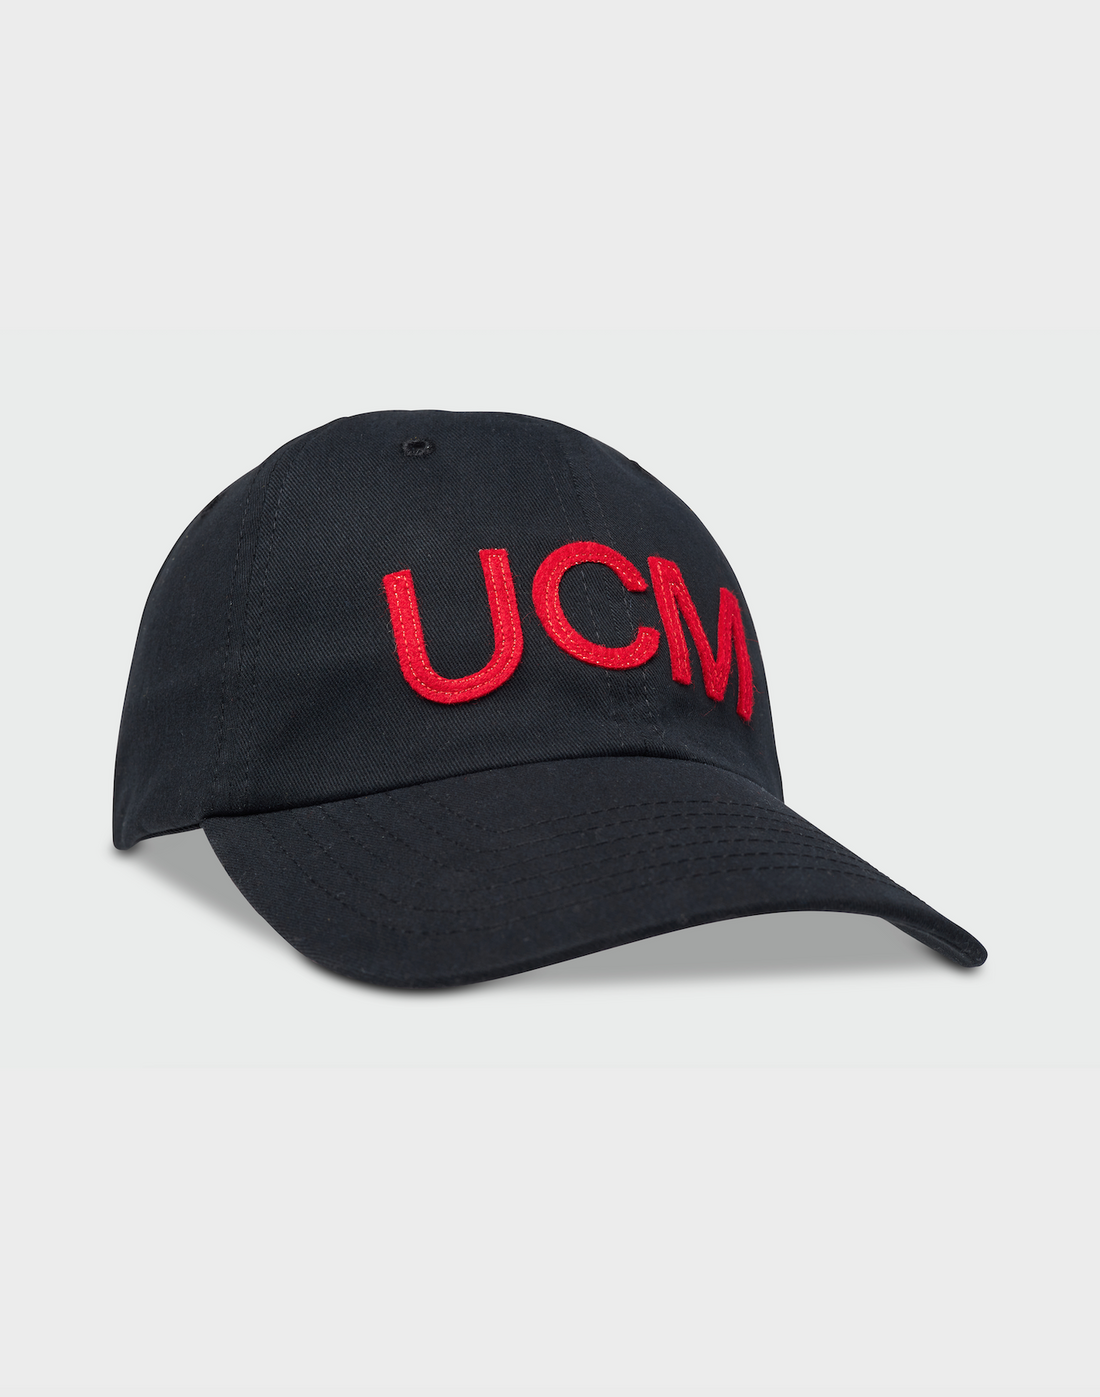 Helvetica UCM - Sanded Twill Black Pre-Curved Hat